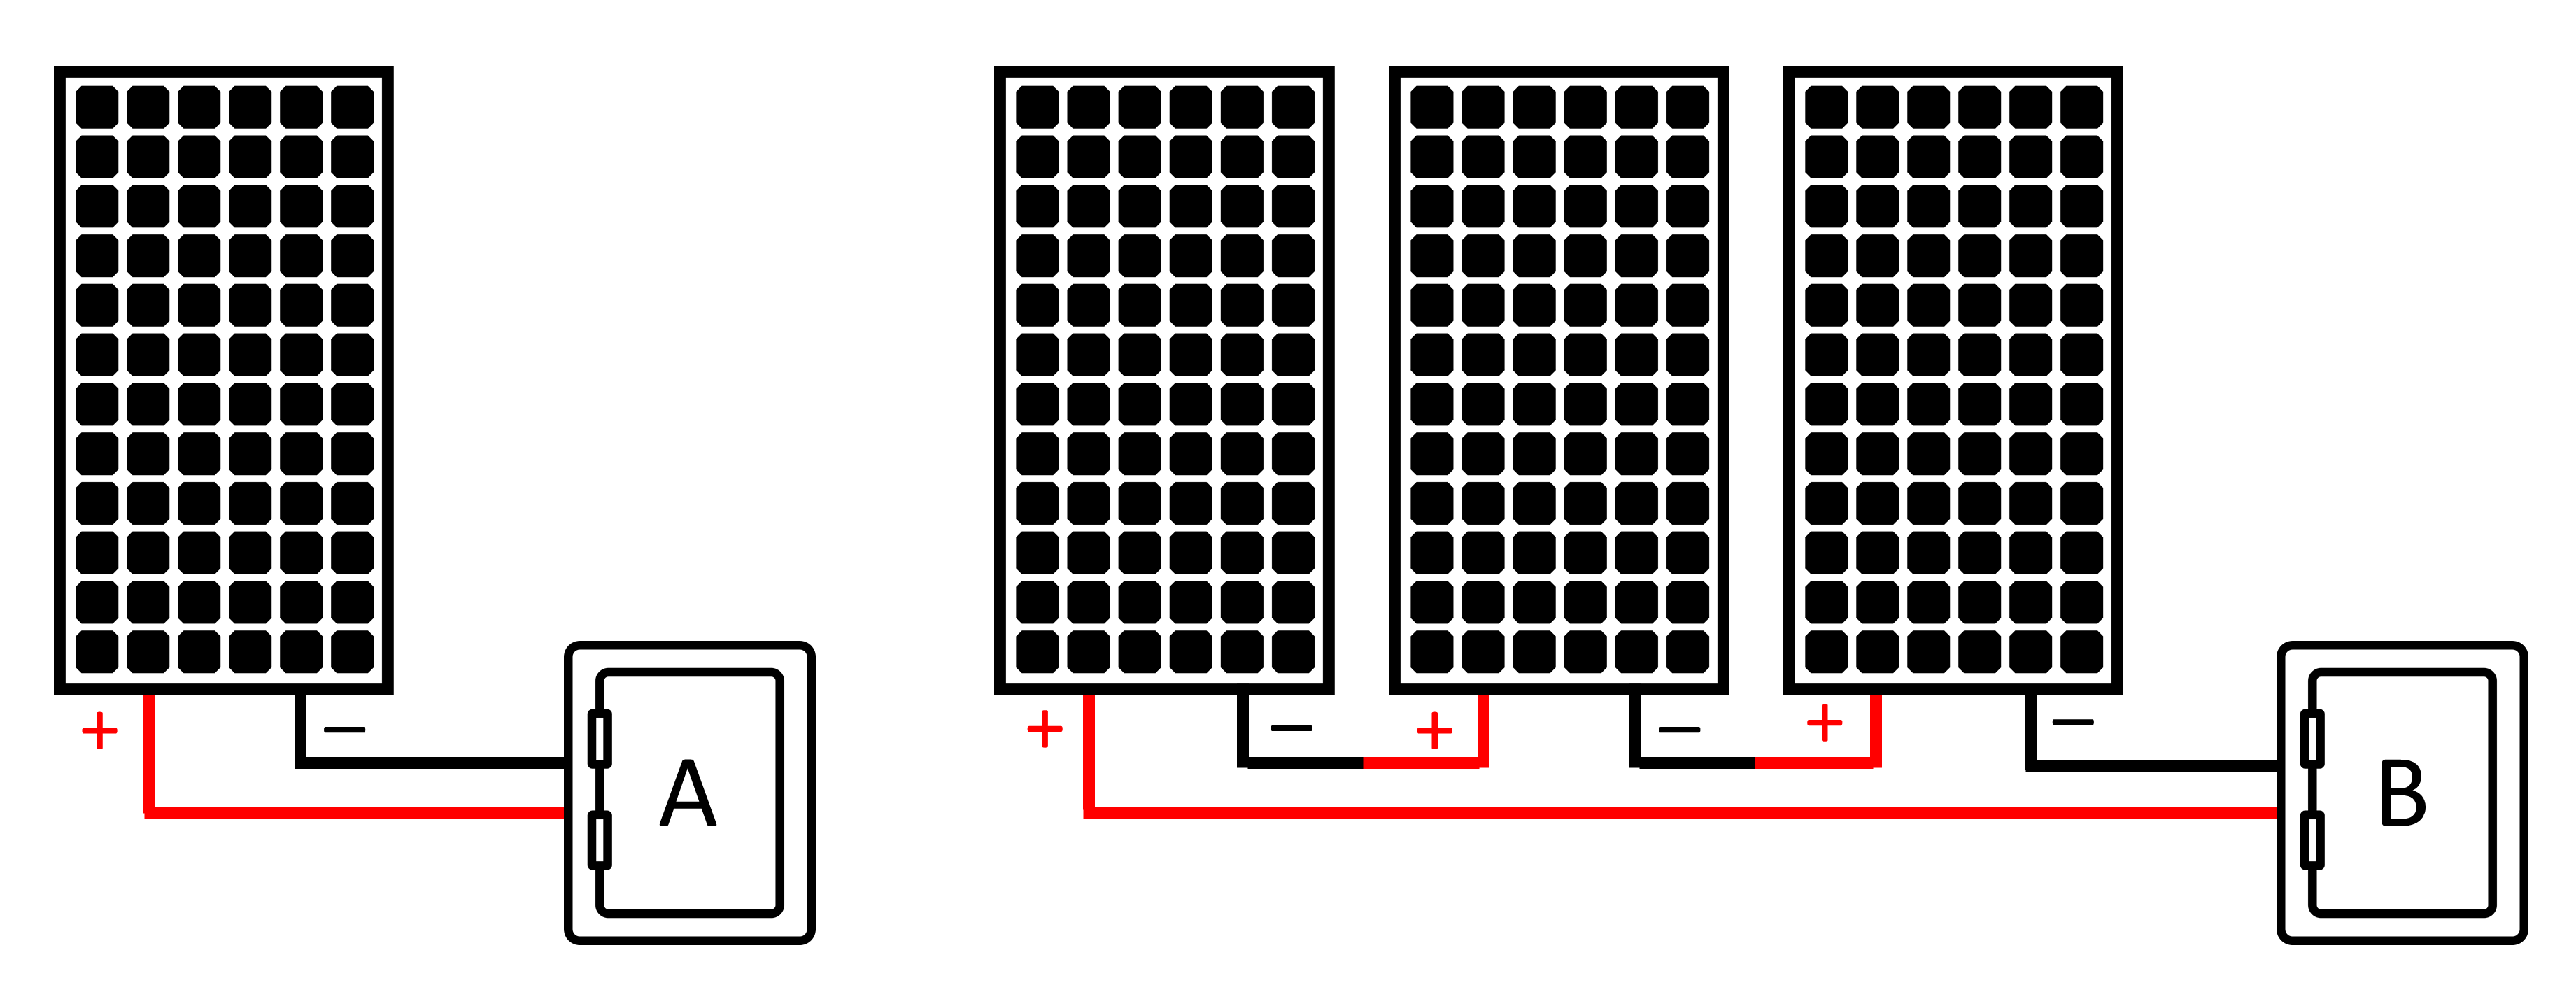 Examples of single series strings requiring no overcurrent protection, including a single PV module (left) and three series-connected PV modules (right).